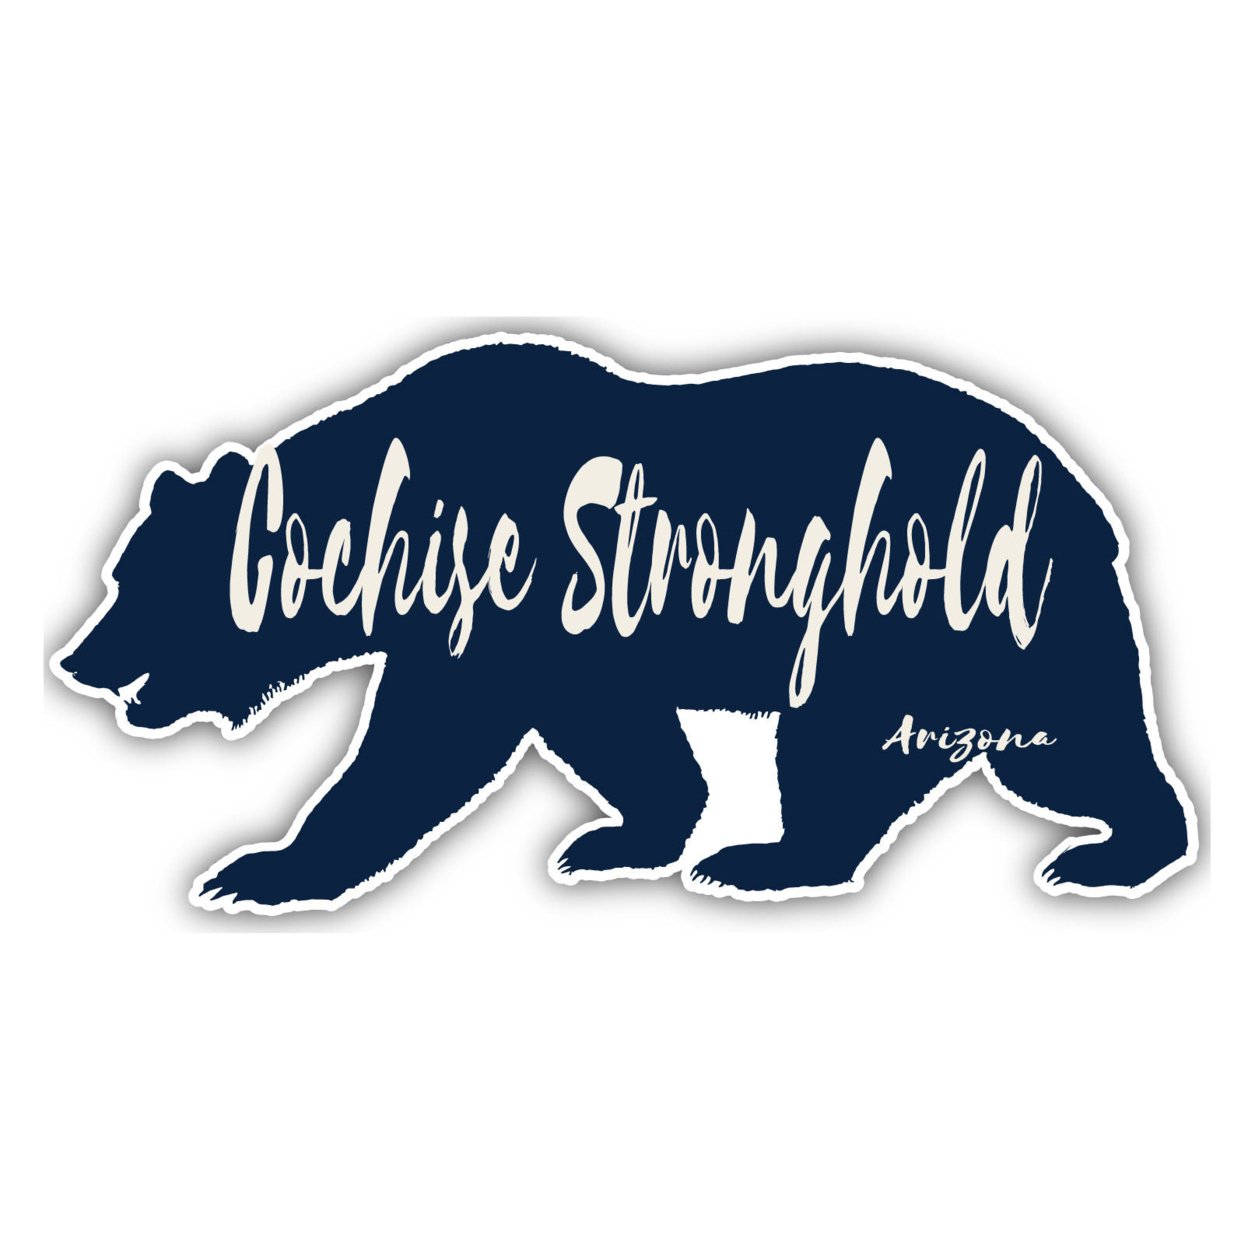 Cochise Stronghold Arizona Souvenir Decorative Stickers (Choose Theme And Size) - 4-Pack, 4-Inch, Bear